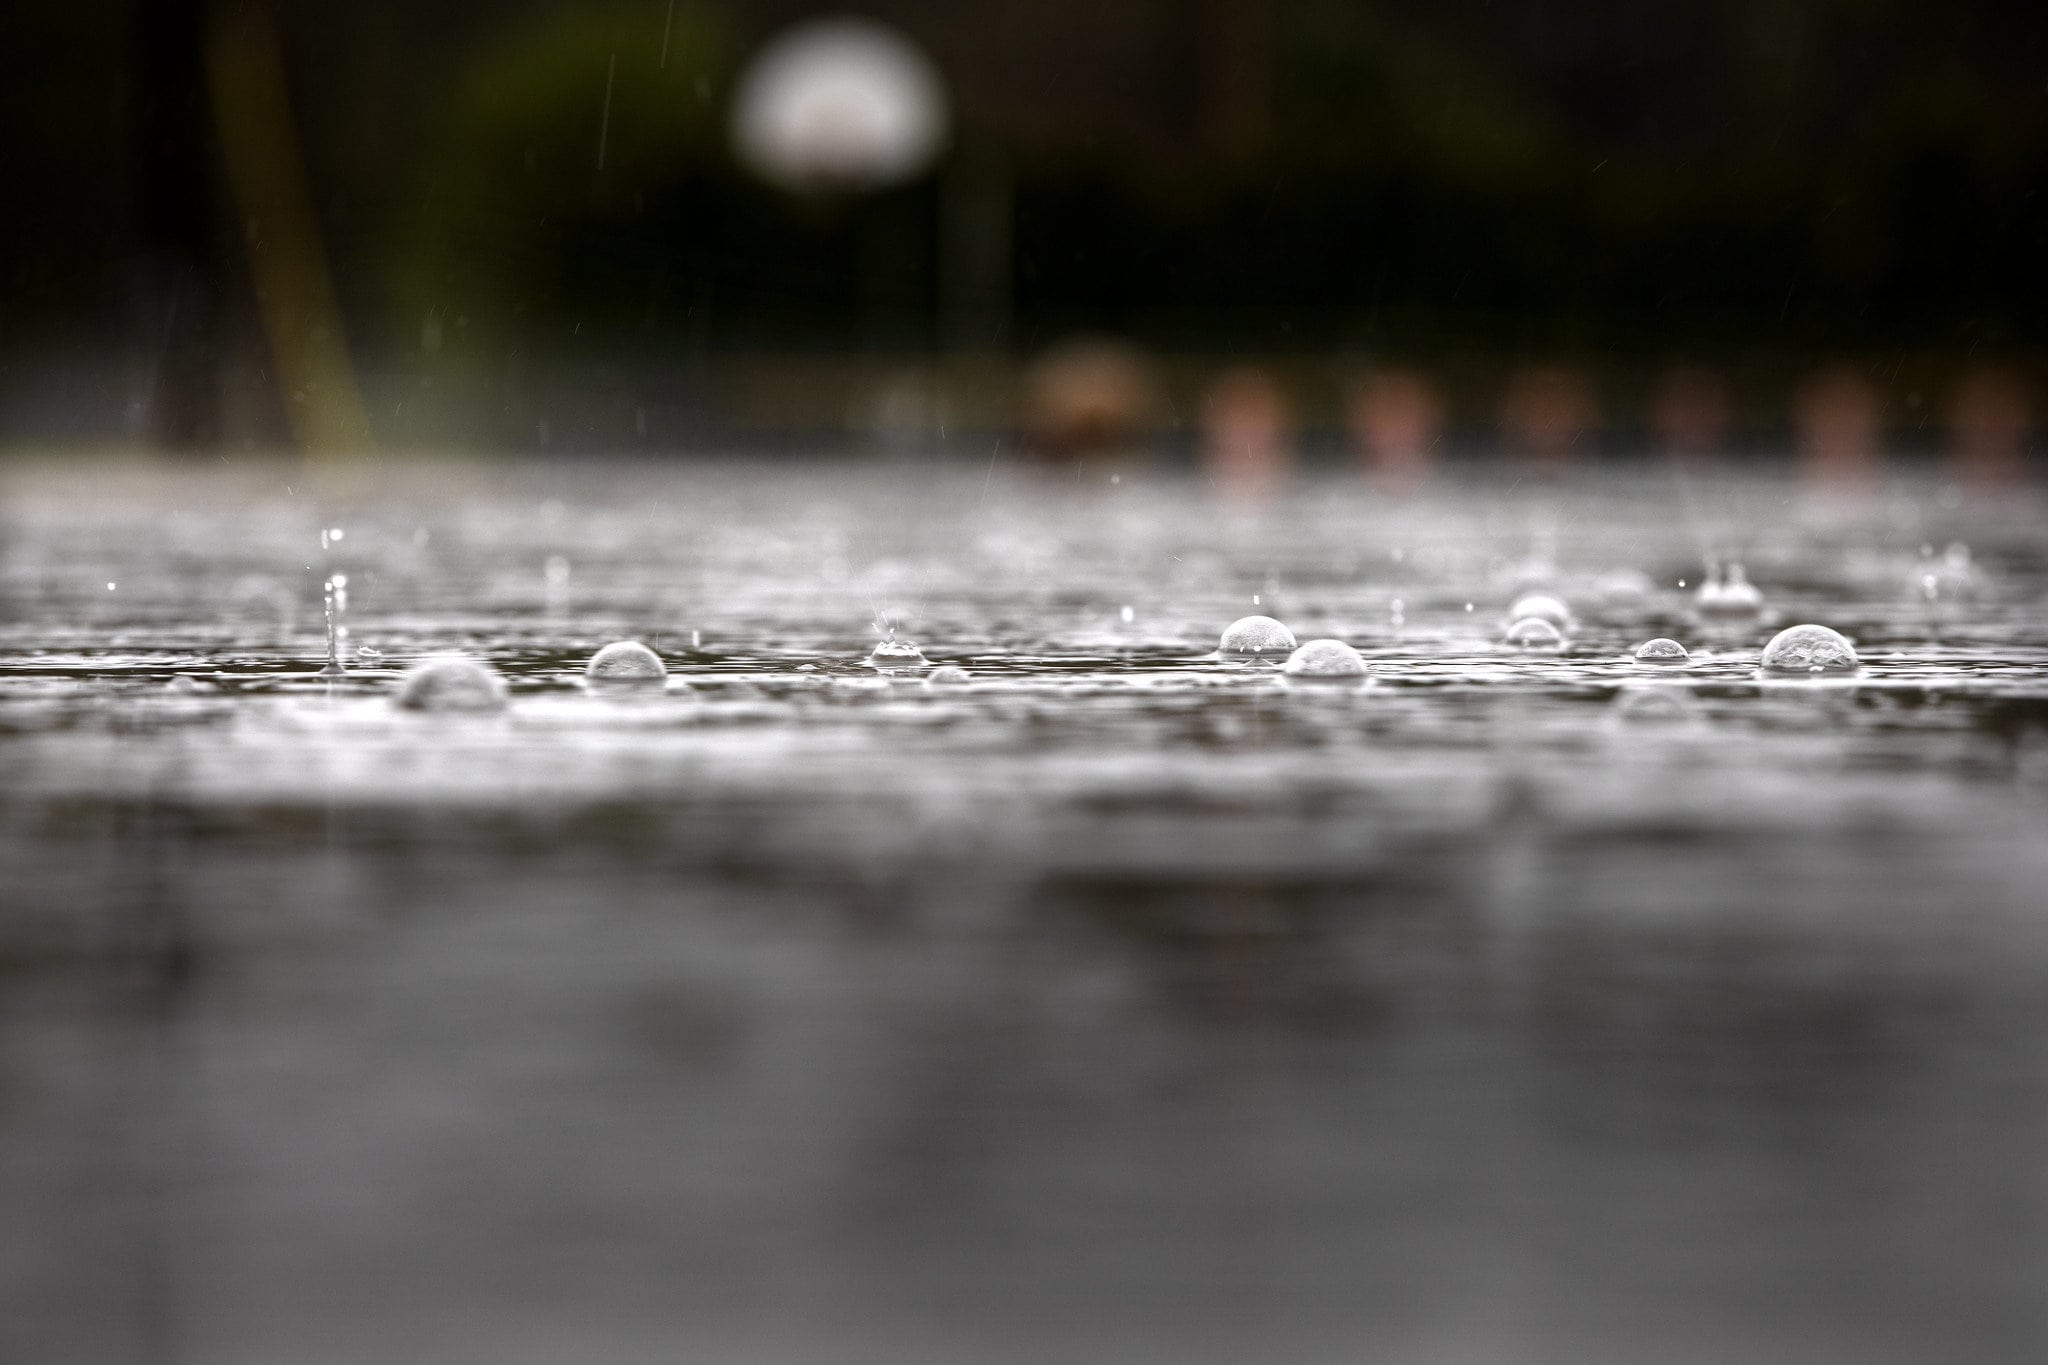 A close-up of a puddle, showing raindrops splashing in and bubbles on the surface.